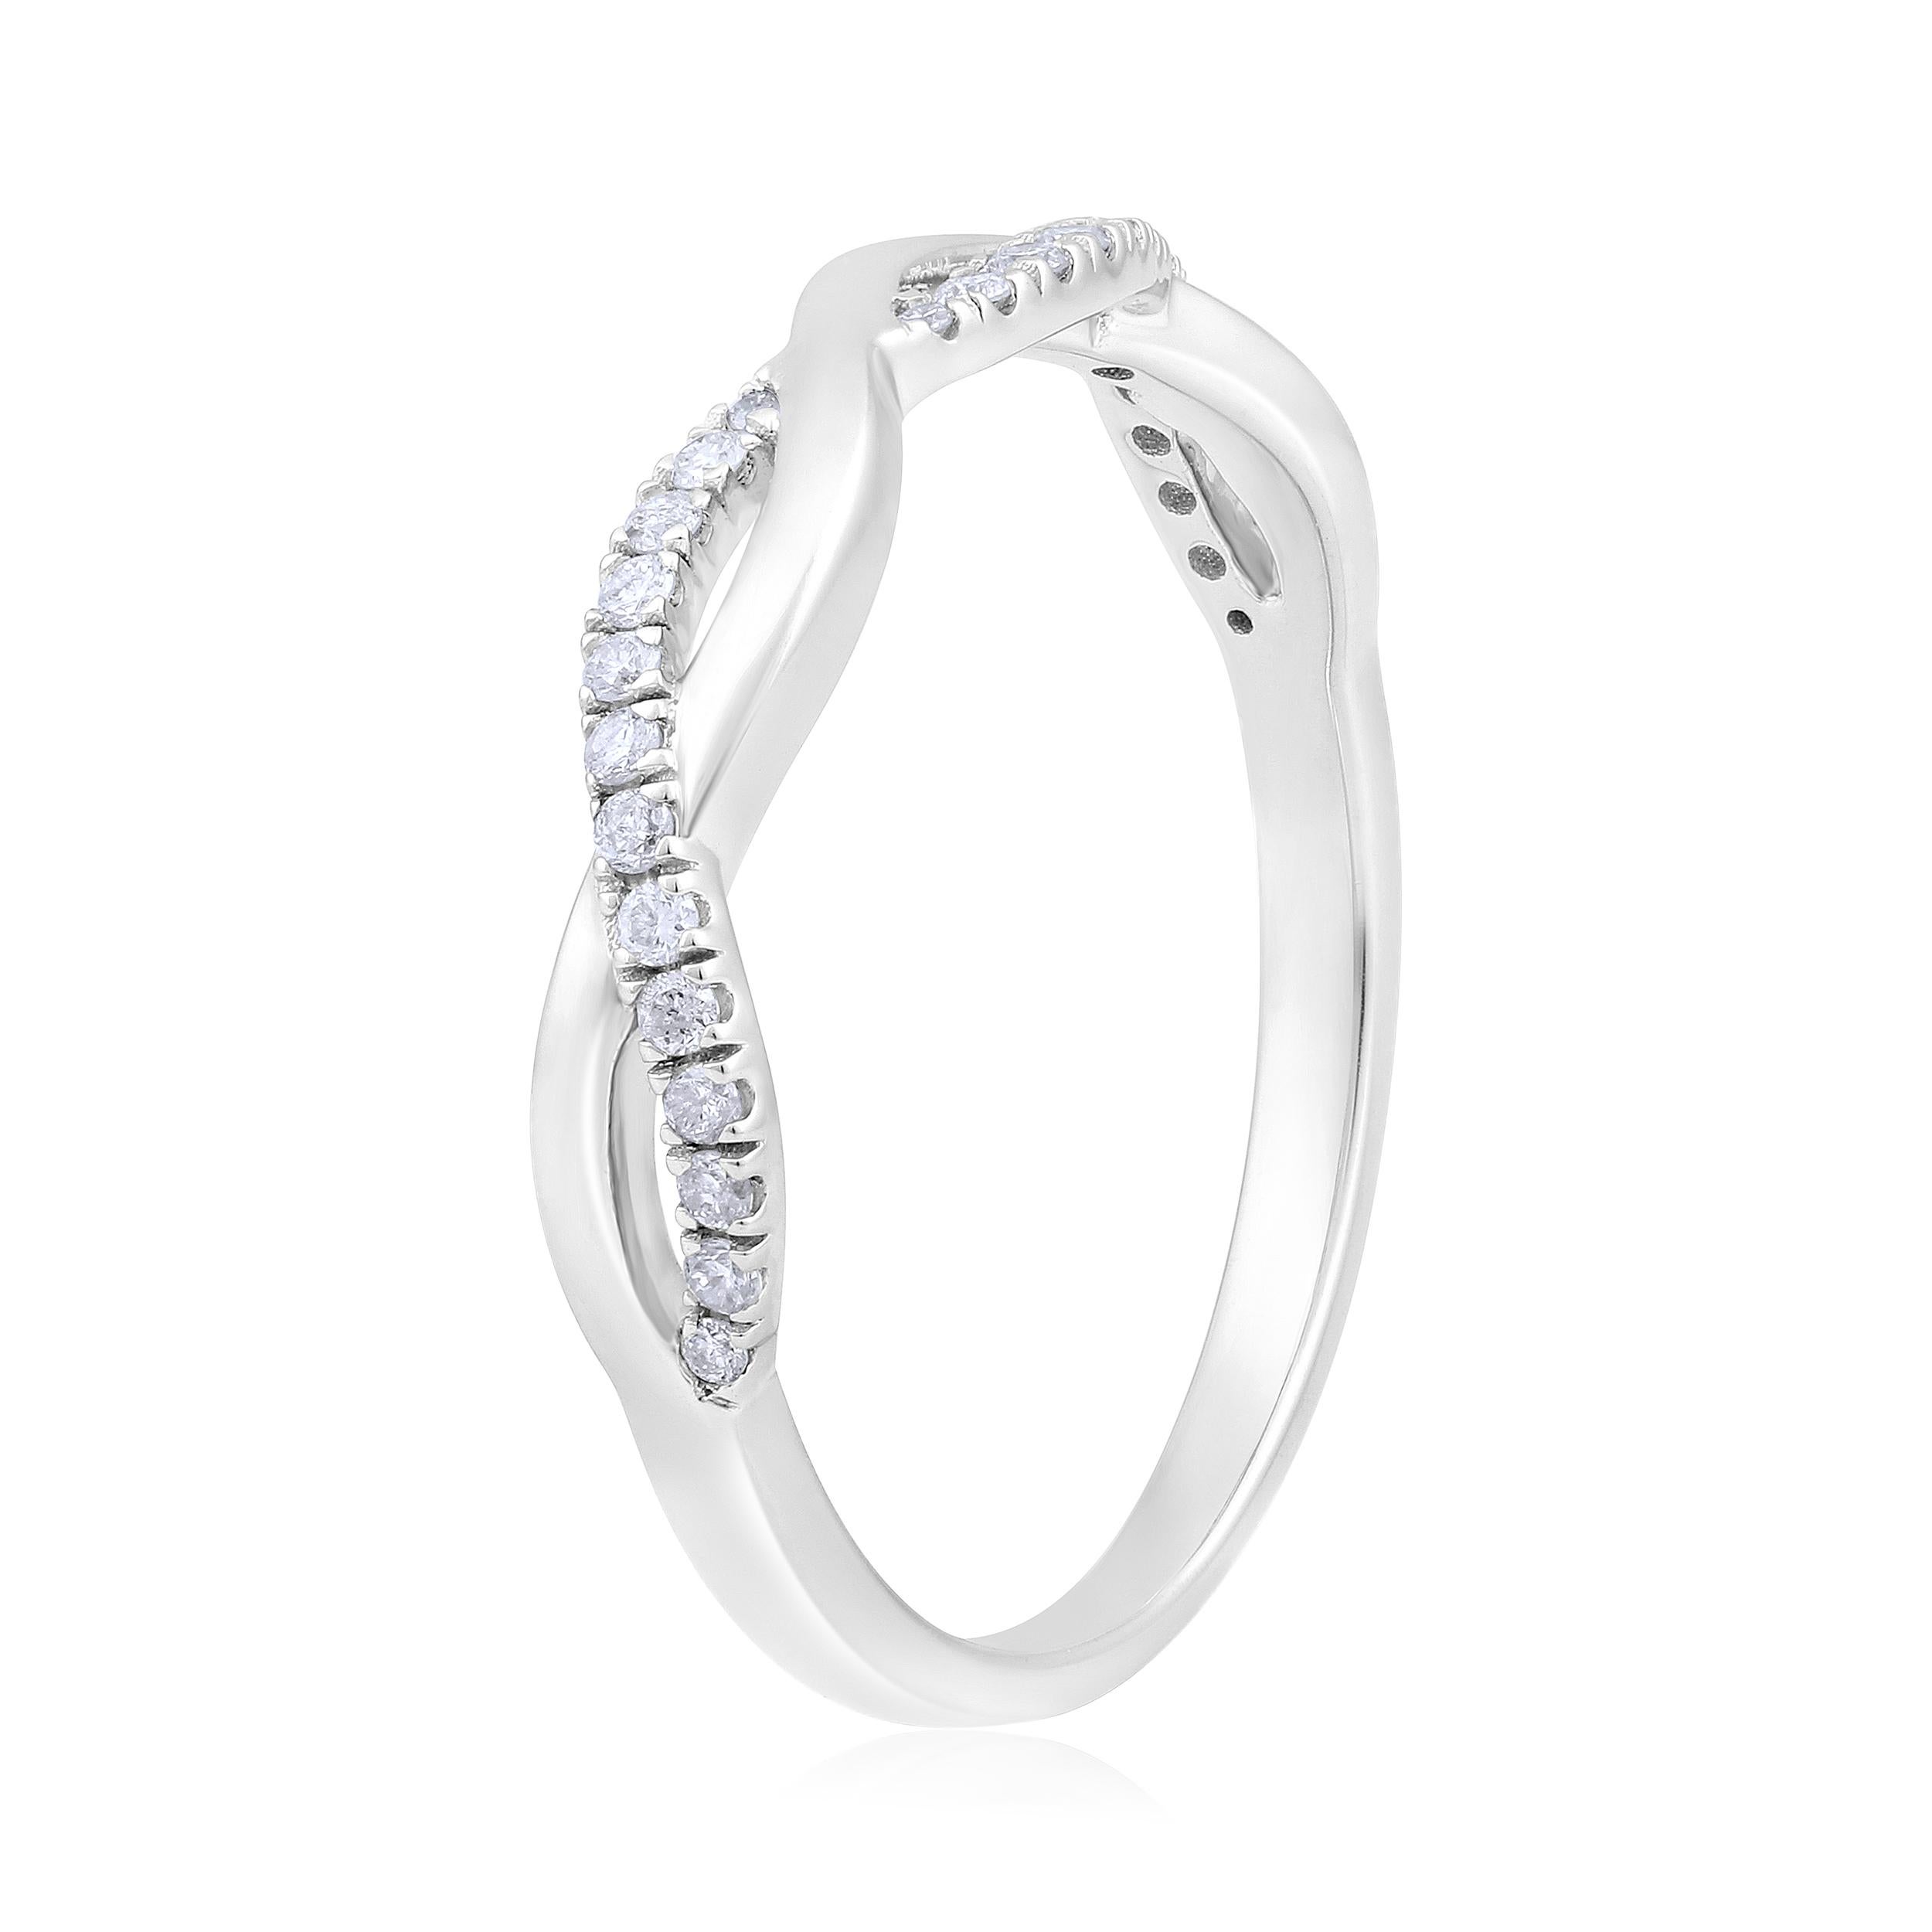 Ring Size: US 7.5 

Crafted in 1.83 grams of 10K White Gold, the ring contains 26 stones of Round Diamonds with a total of 0.16 carat in F-G color and I1-I2 clarity.

CONTEMPORARY AND TIMELESS ESSENCE: Crafted in 14-karat/18-karat with 100% natural